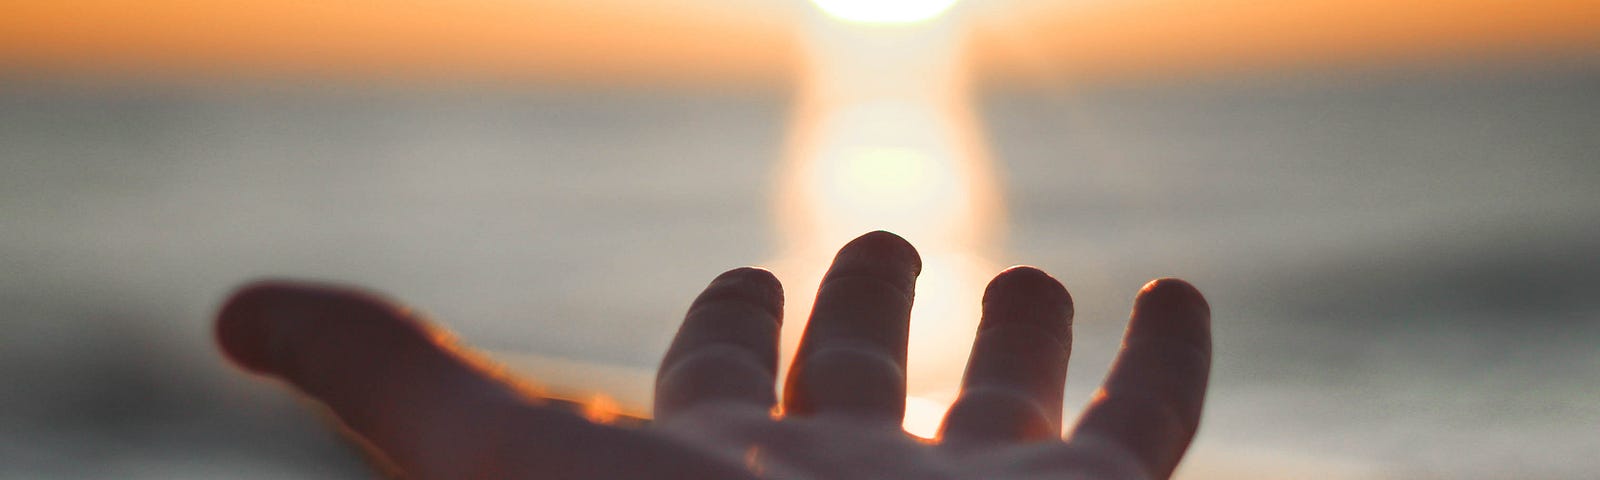 An outstretched arm reaches out for the setting sun in the distance. The background is blurred. Ultraviolet radiation exposure is the leading cause of skin cancer, including melanoma.